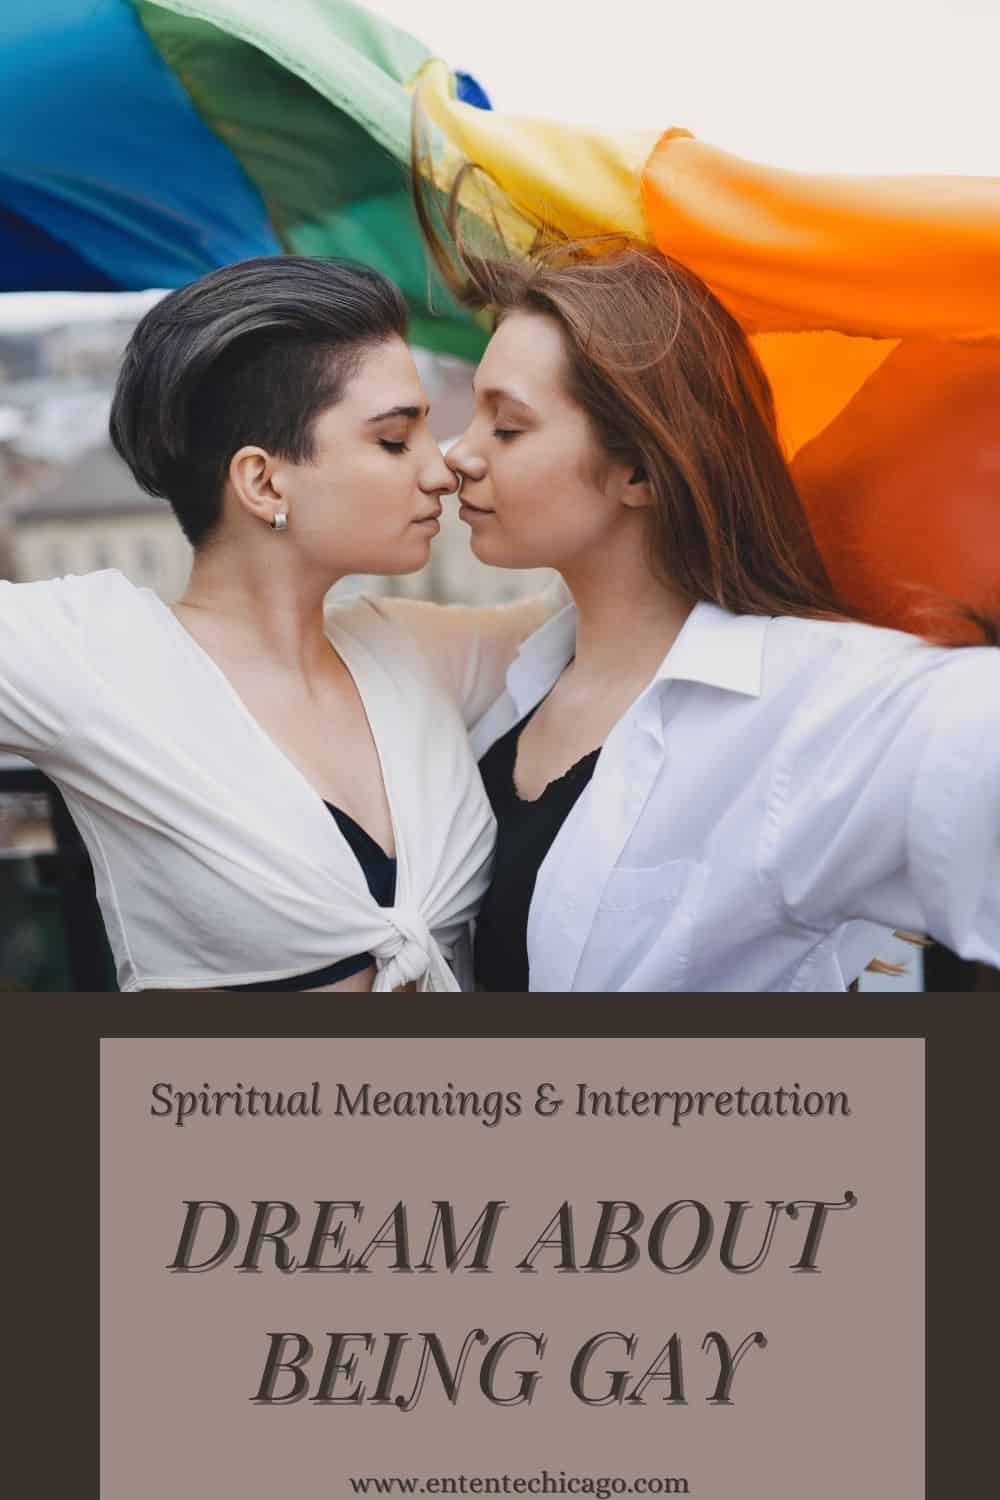 Dream About Being Gay (Spiritual Meanings & Interpretation)